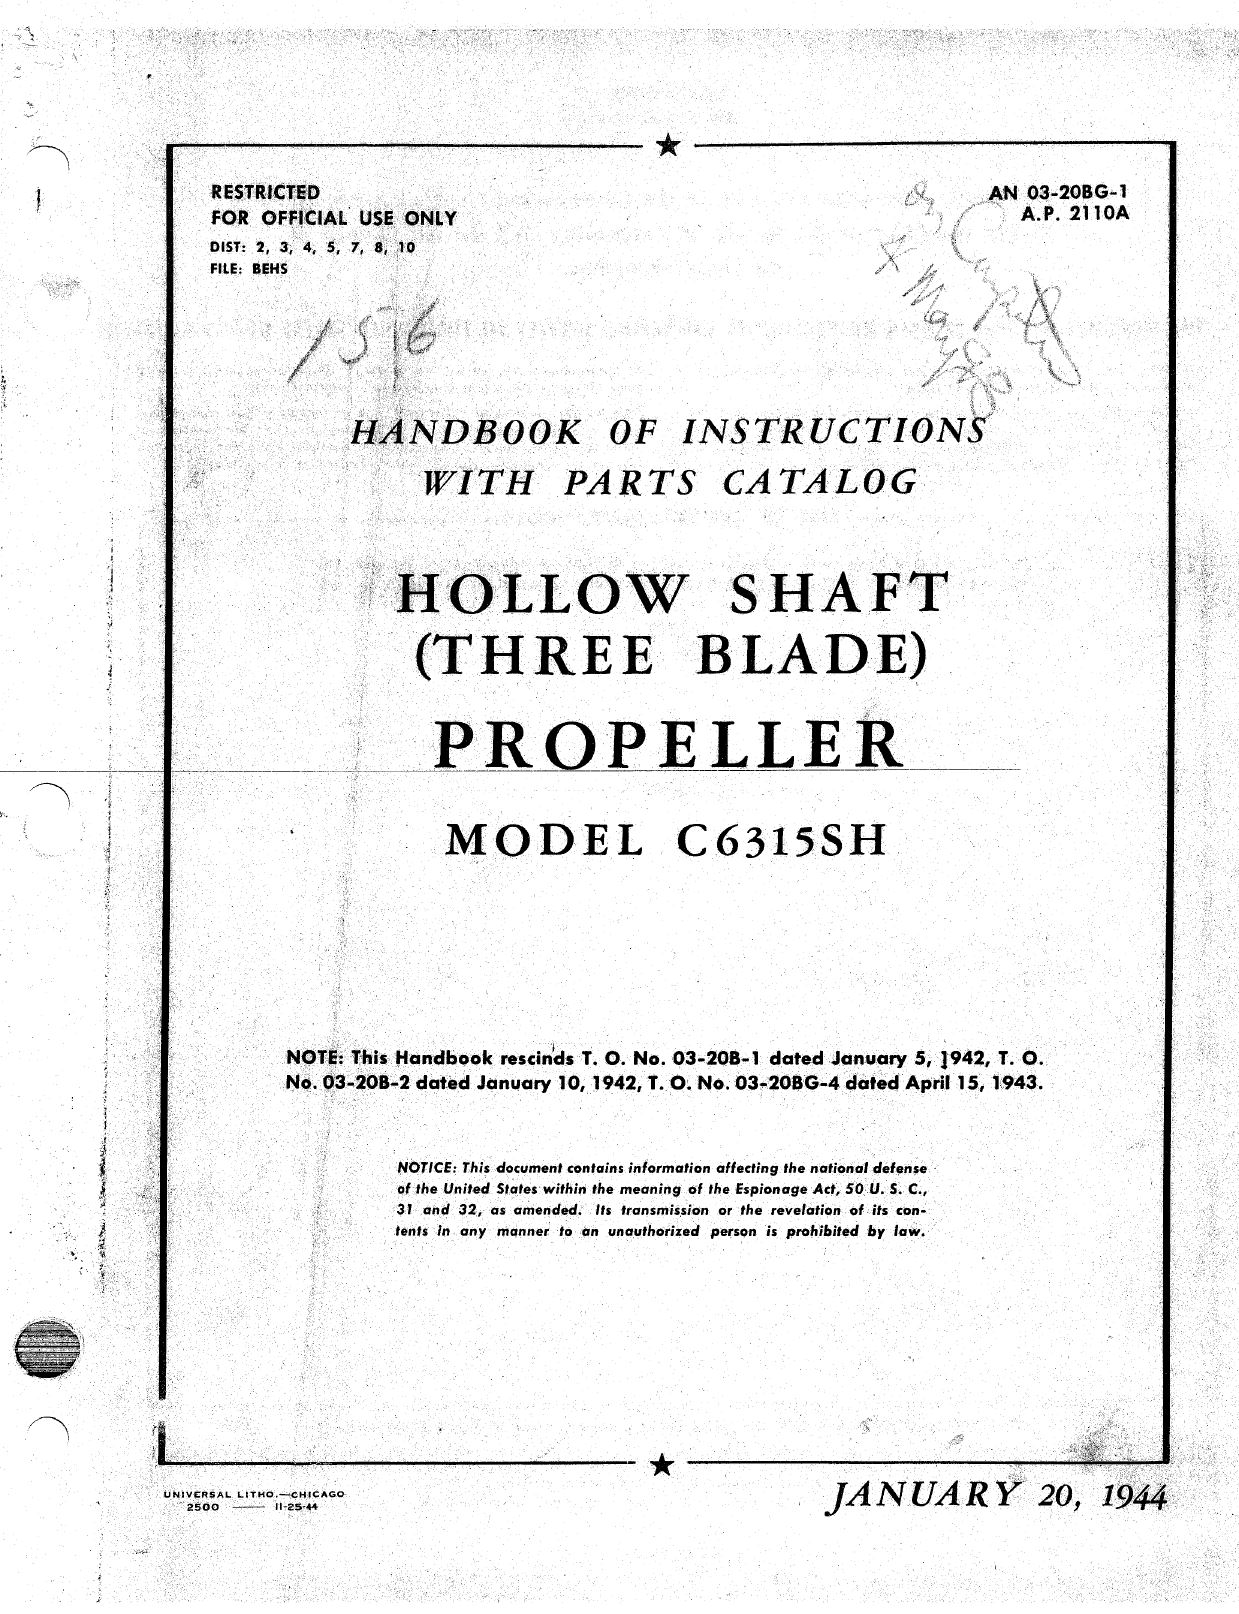 Sample page 1 from AirCorps Library document: Handbook of Instructions with Parts Catalog for Hollow Shaft (Three Blade) Propeller Model C6315SH